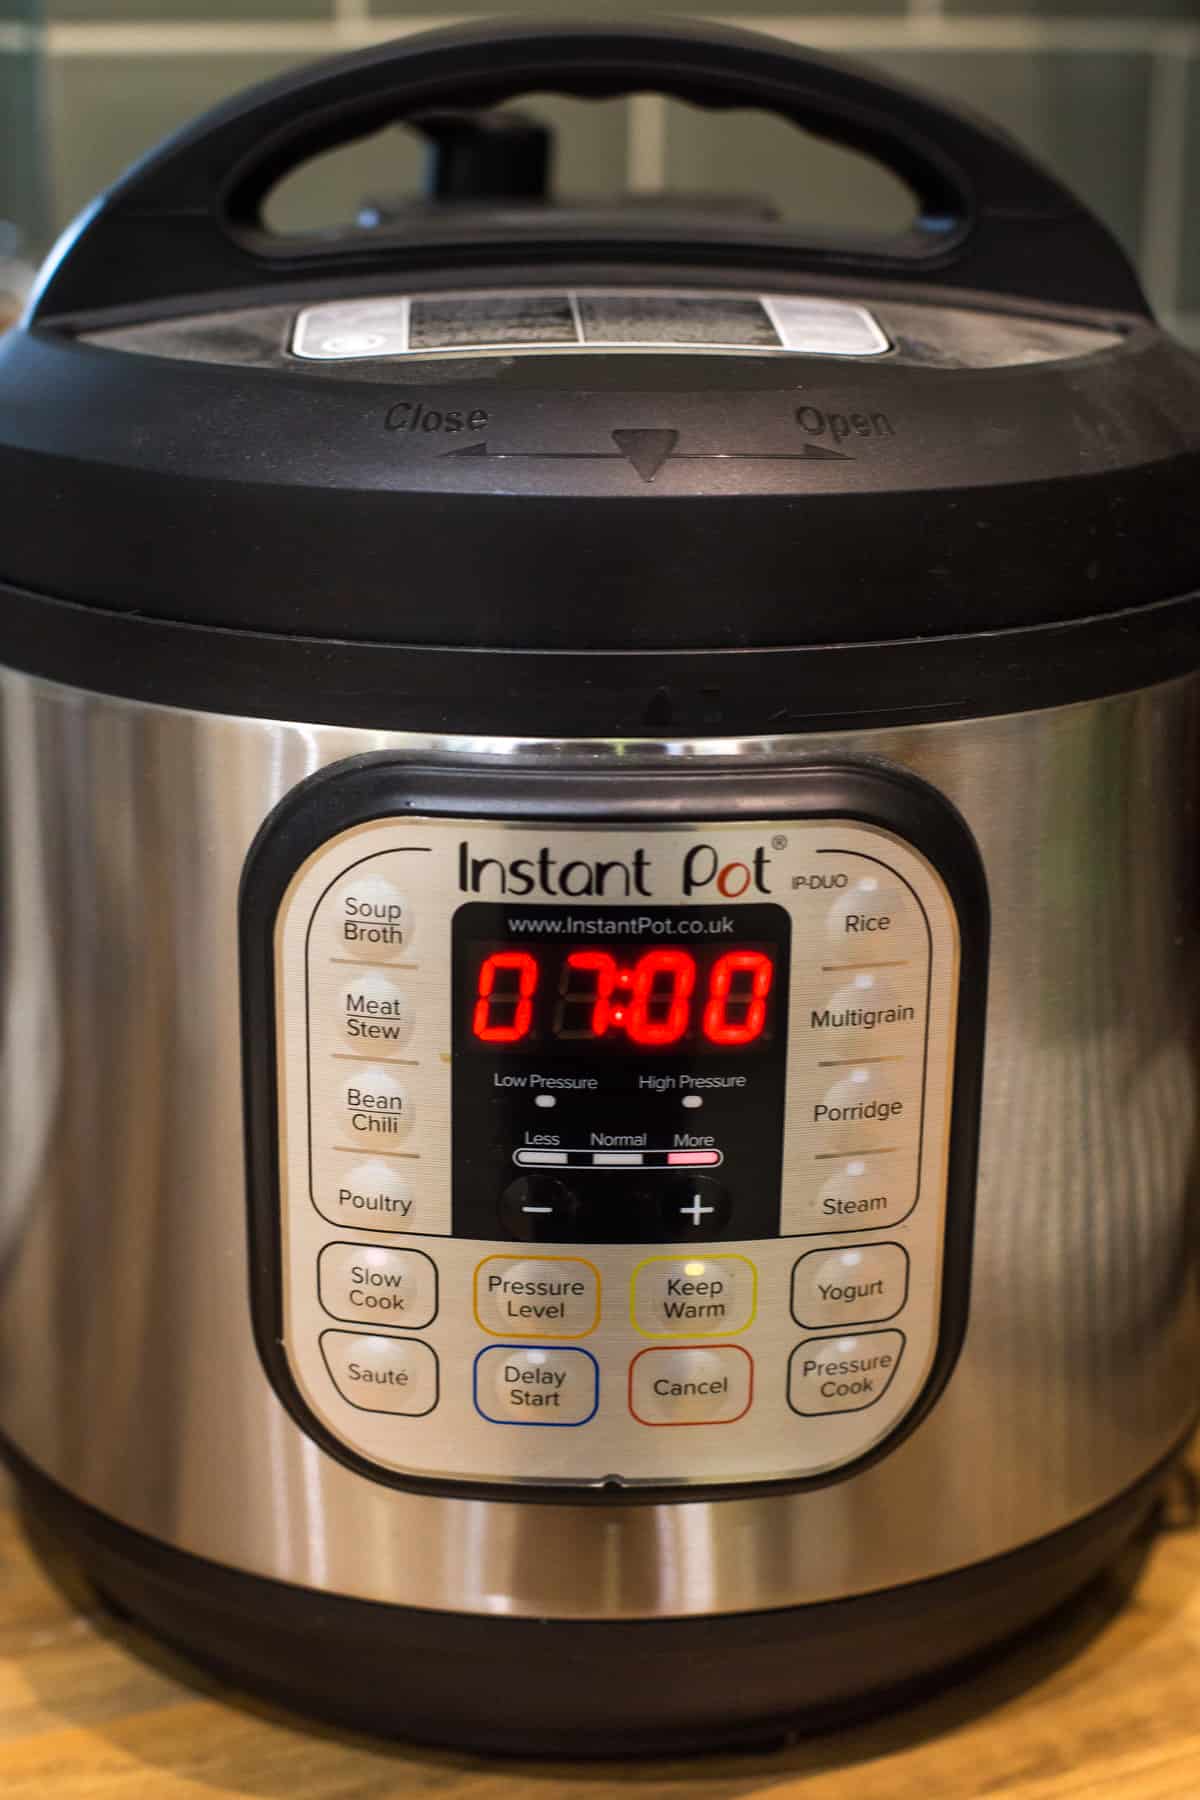 Instant Pot set to slow cook for 7 hours